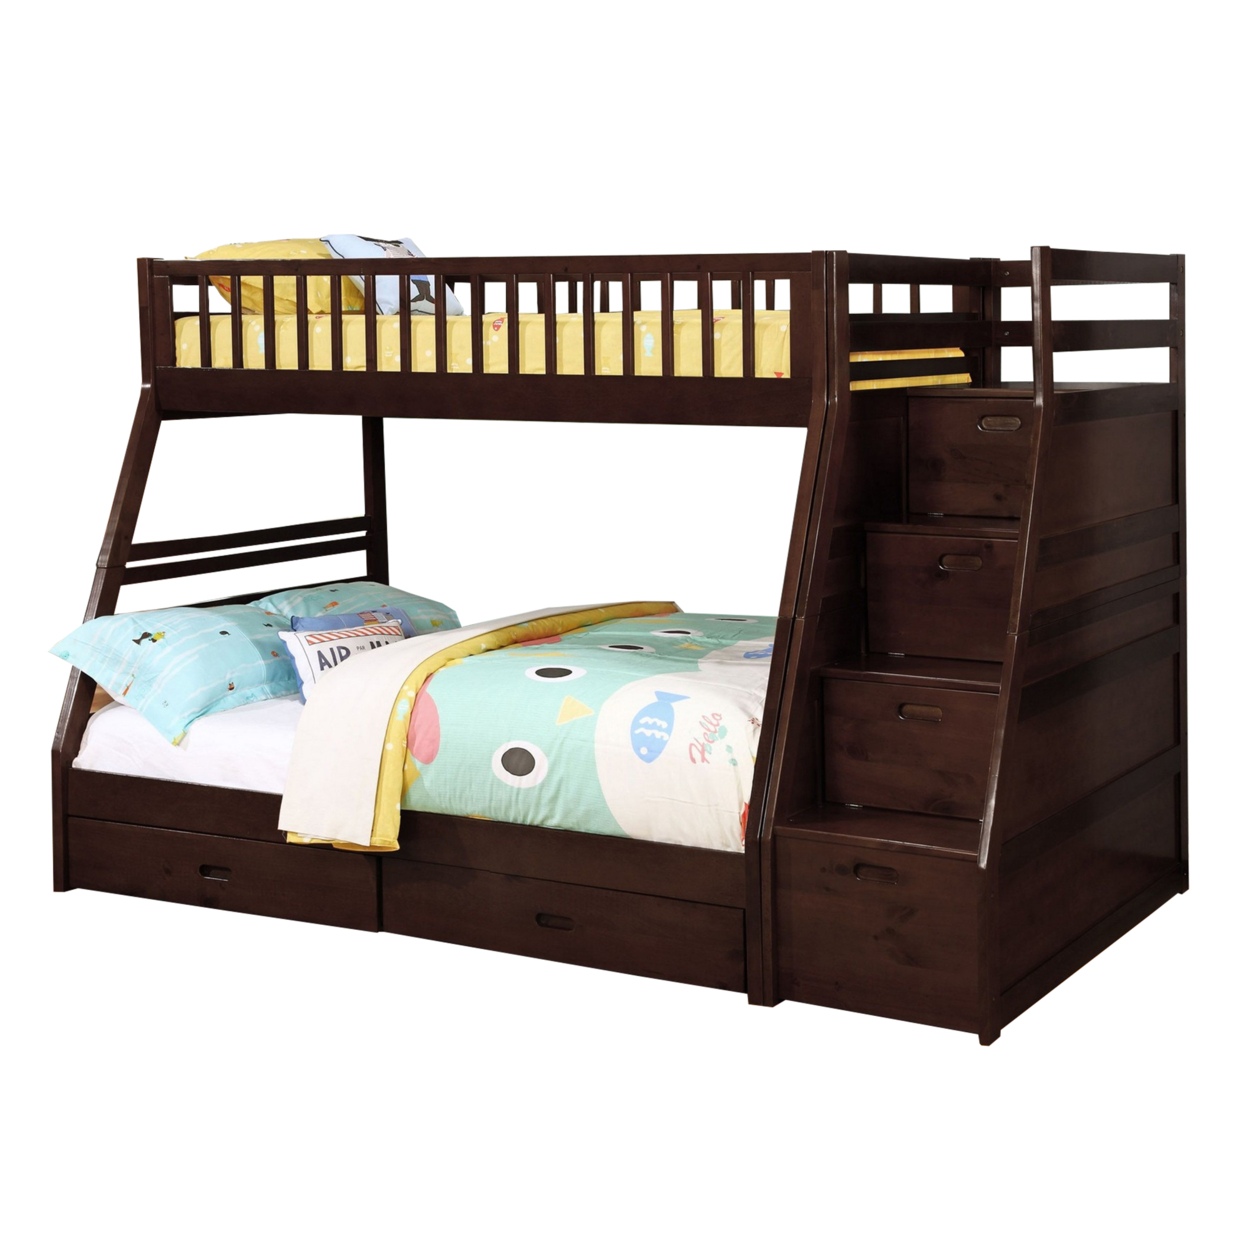 2 Drawer Wooden Twin Over Full Bunk Bed With Storage Staircase, Brown- Saltoro Sherpi